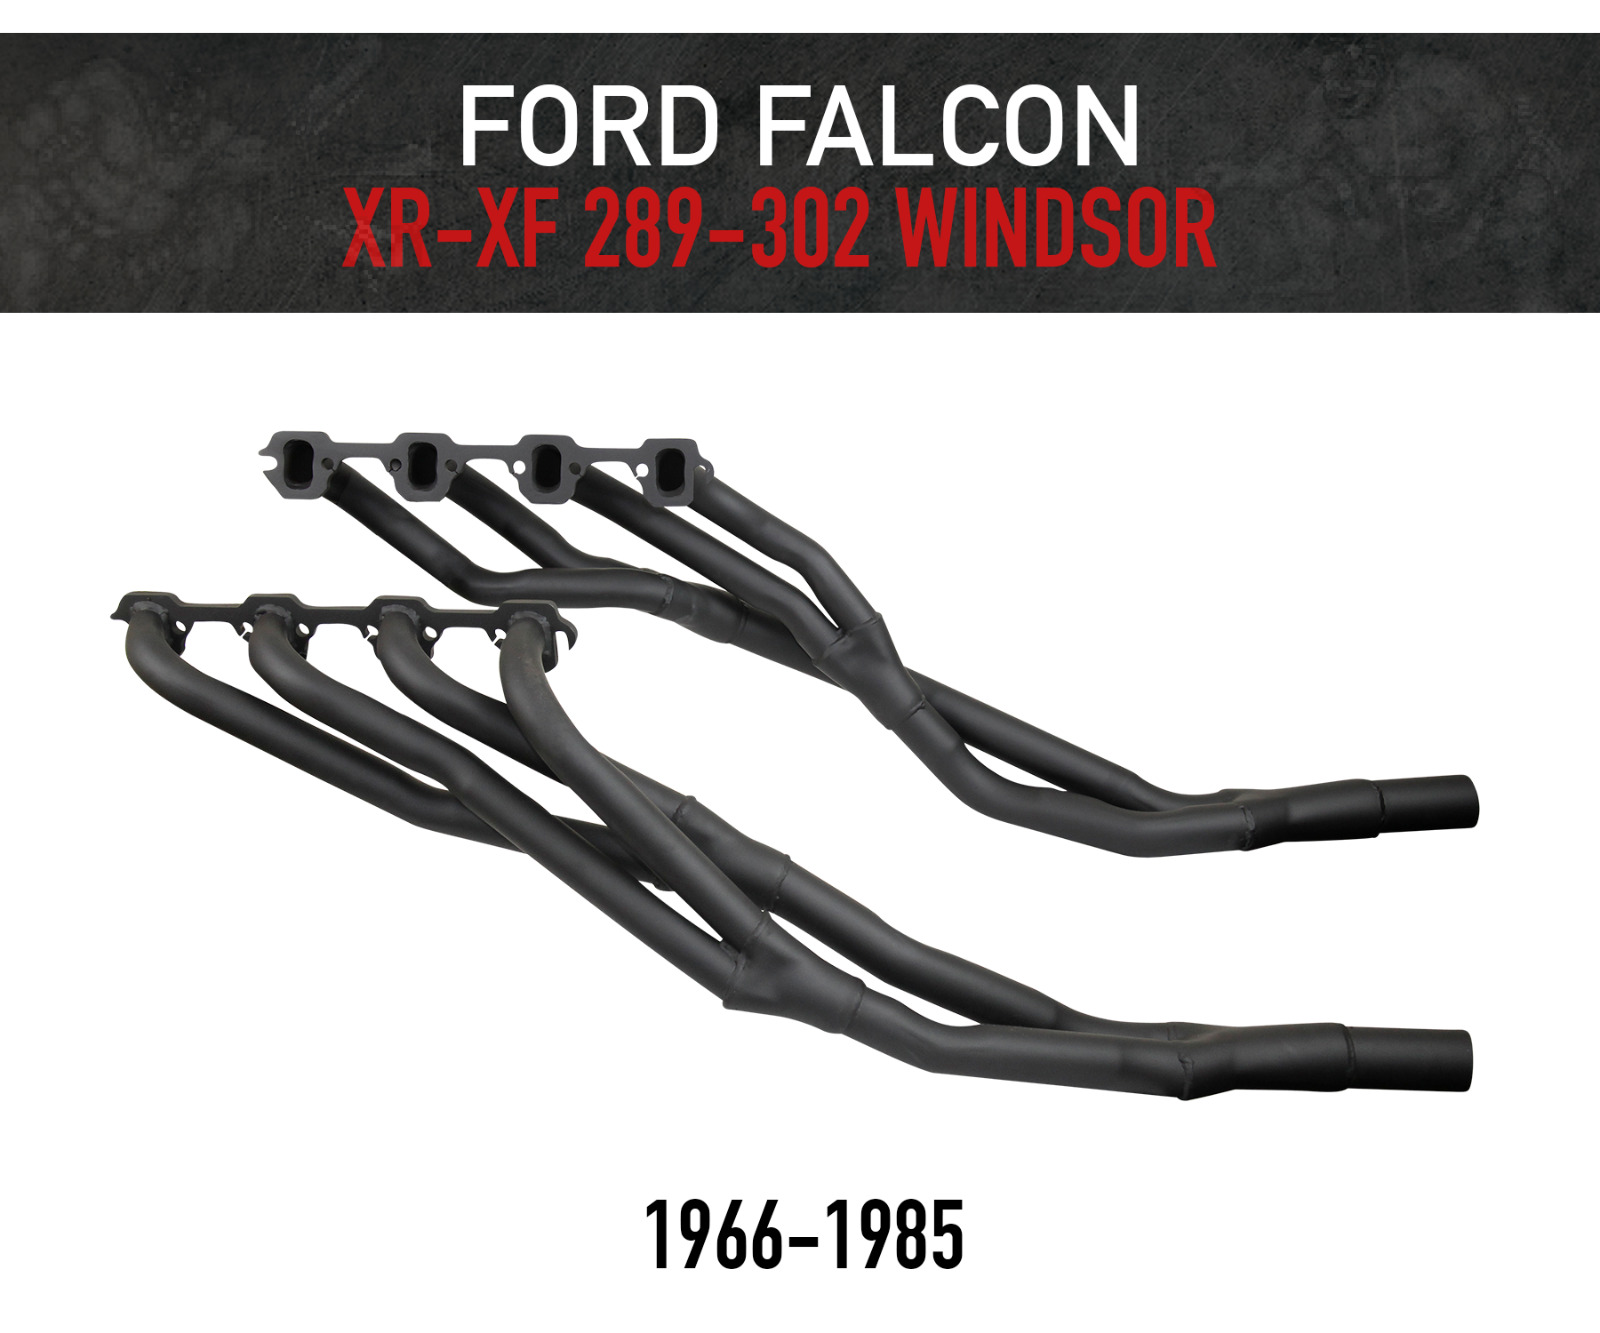 Header / Extractors to suit Ford Falcon XR-XF V8 (1966-1985) Windsor 289-302